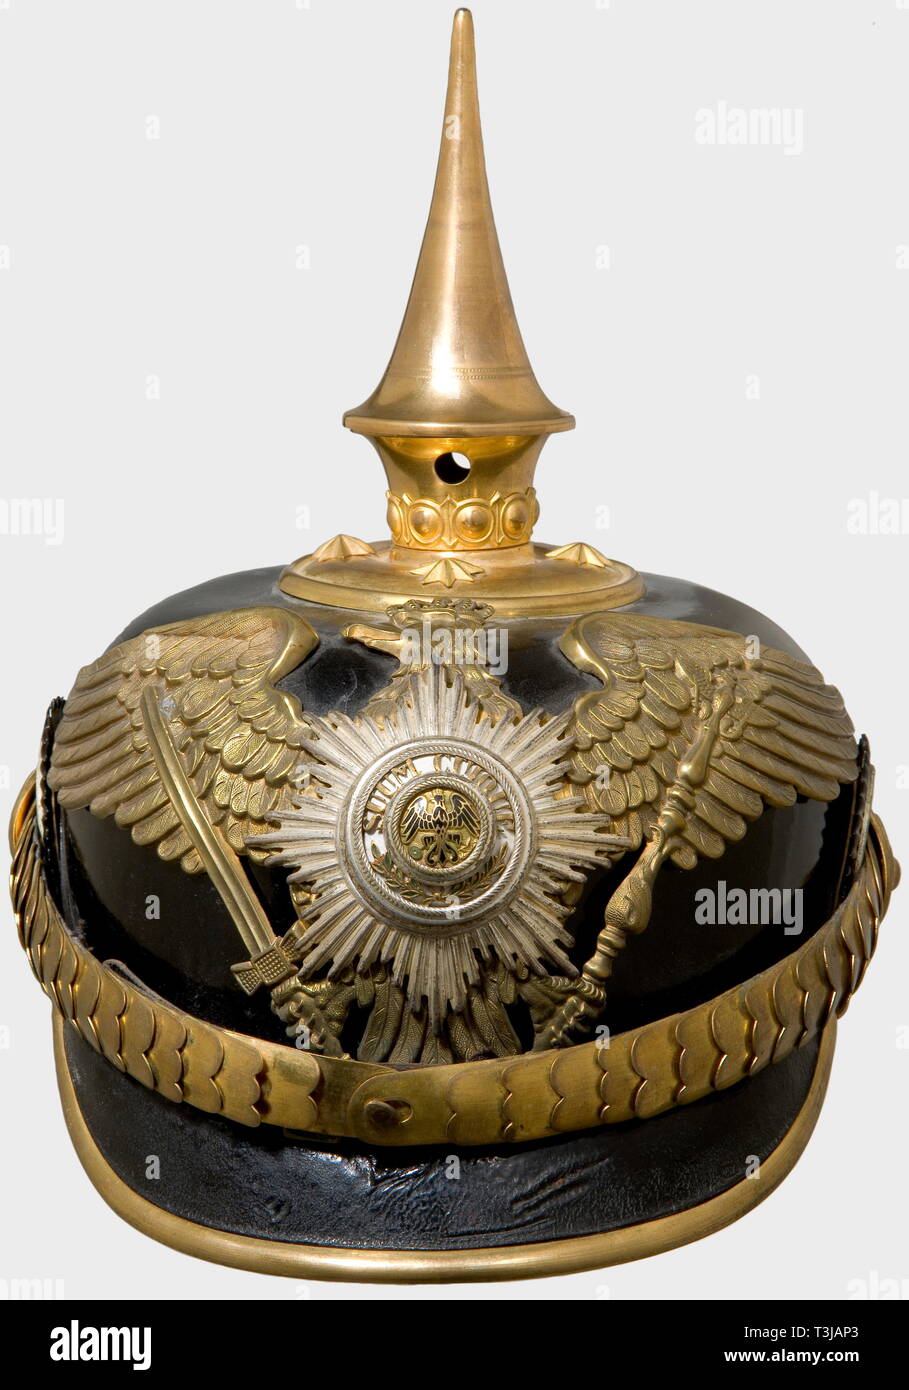 A helmet for an officer, of the Prussian Guard Train Battalion Black lacquered leather skull (age cracks) with gilt mountings, cambered metal chinscales, and guards eagle (worn by cleaning, pin resoldered) with a superimposed, silver-plated, enamelled star. Officer's cockades. The ribbed silk lining replaced. historic, historical, 19th century, Prussian, Prussia, German, Germany, militaria, military, object, objects, stills, clipping, clippings, cut out, cut-out, cut-outs, helmet, helmets, headpiece, headpieces, utensil, piece of equipment, utens, Additional-Rights-Clearance-Info-Not-Available Stock Photo